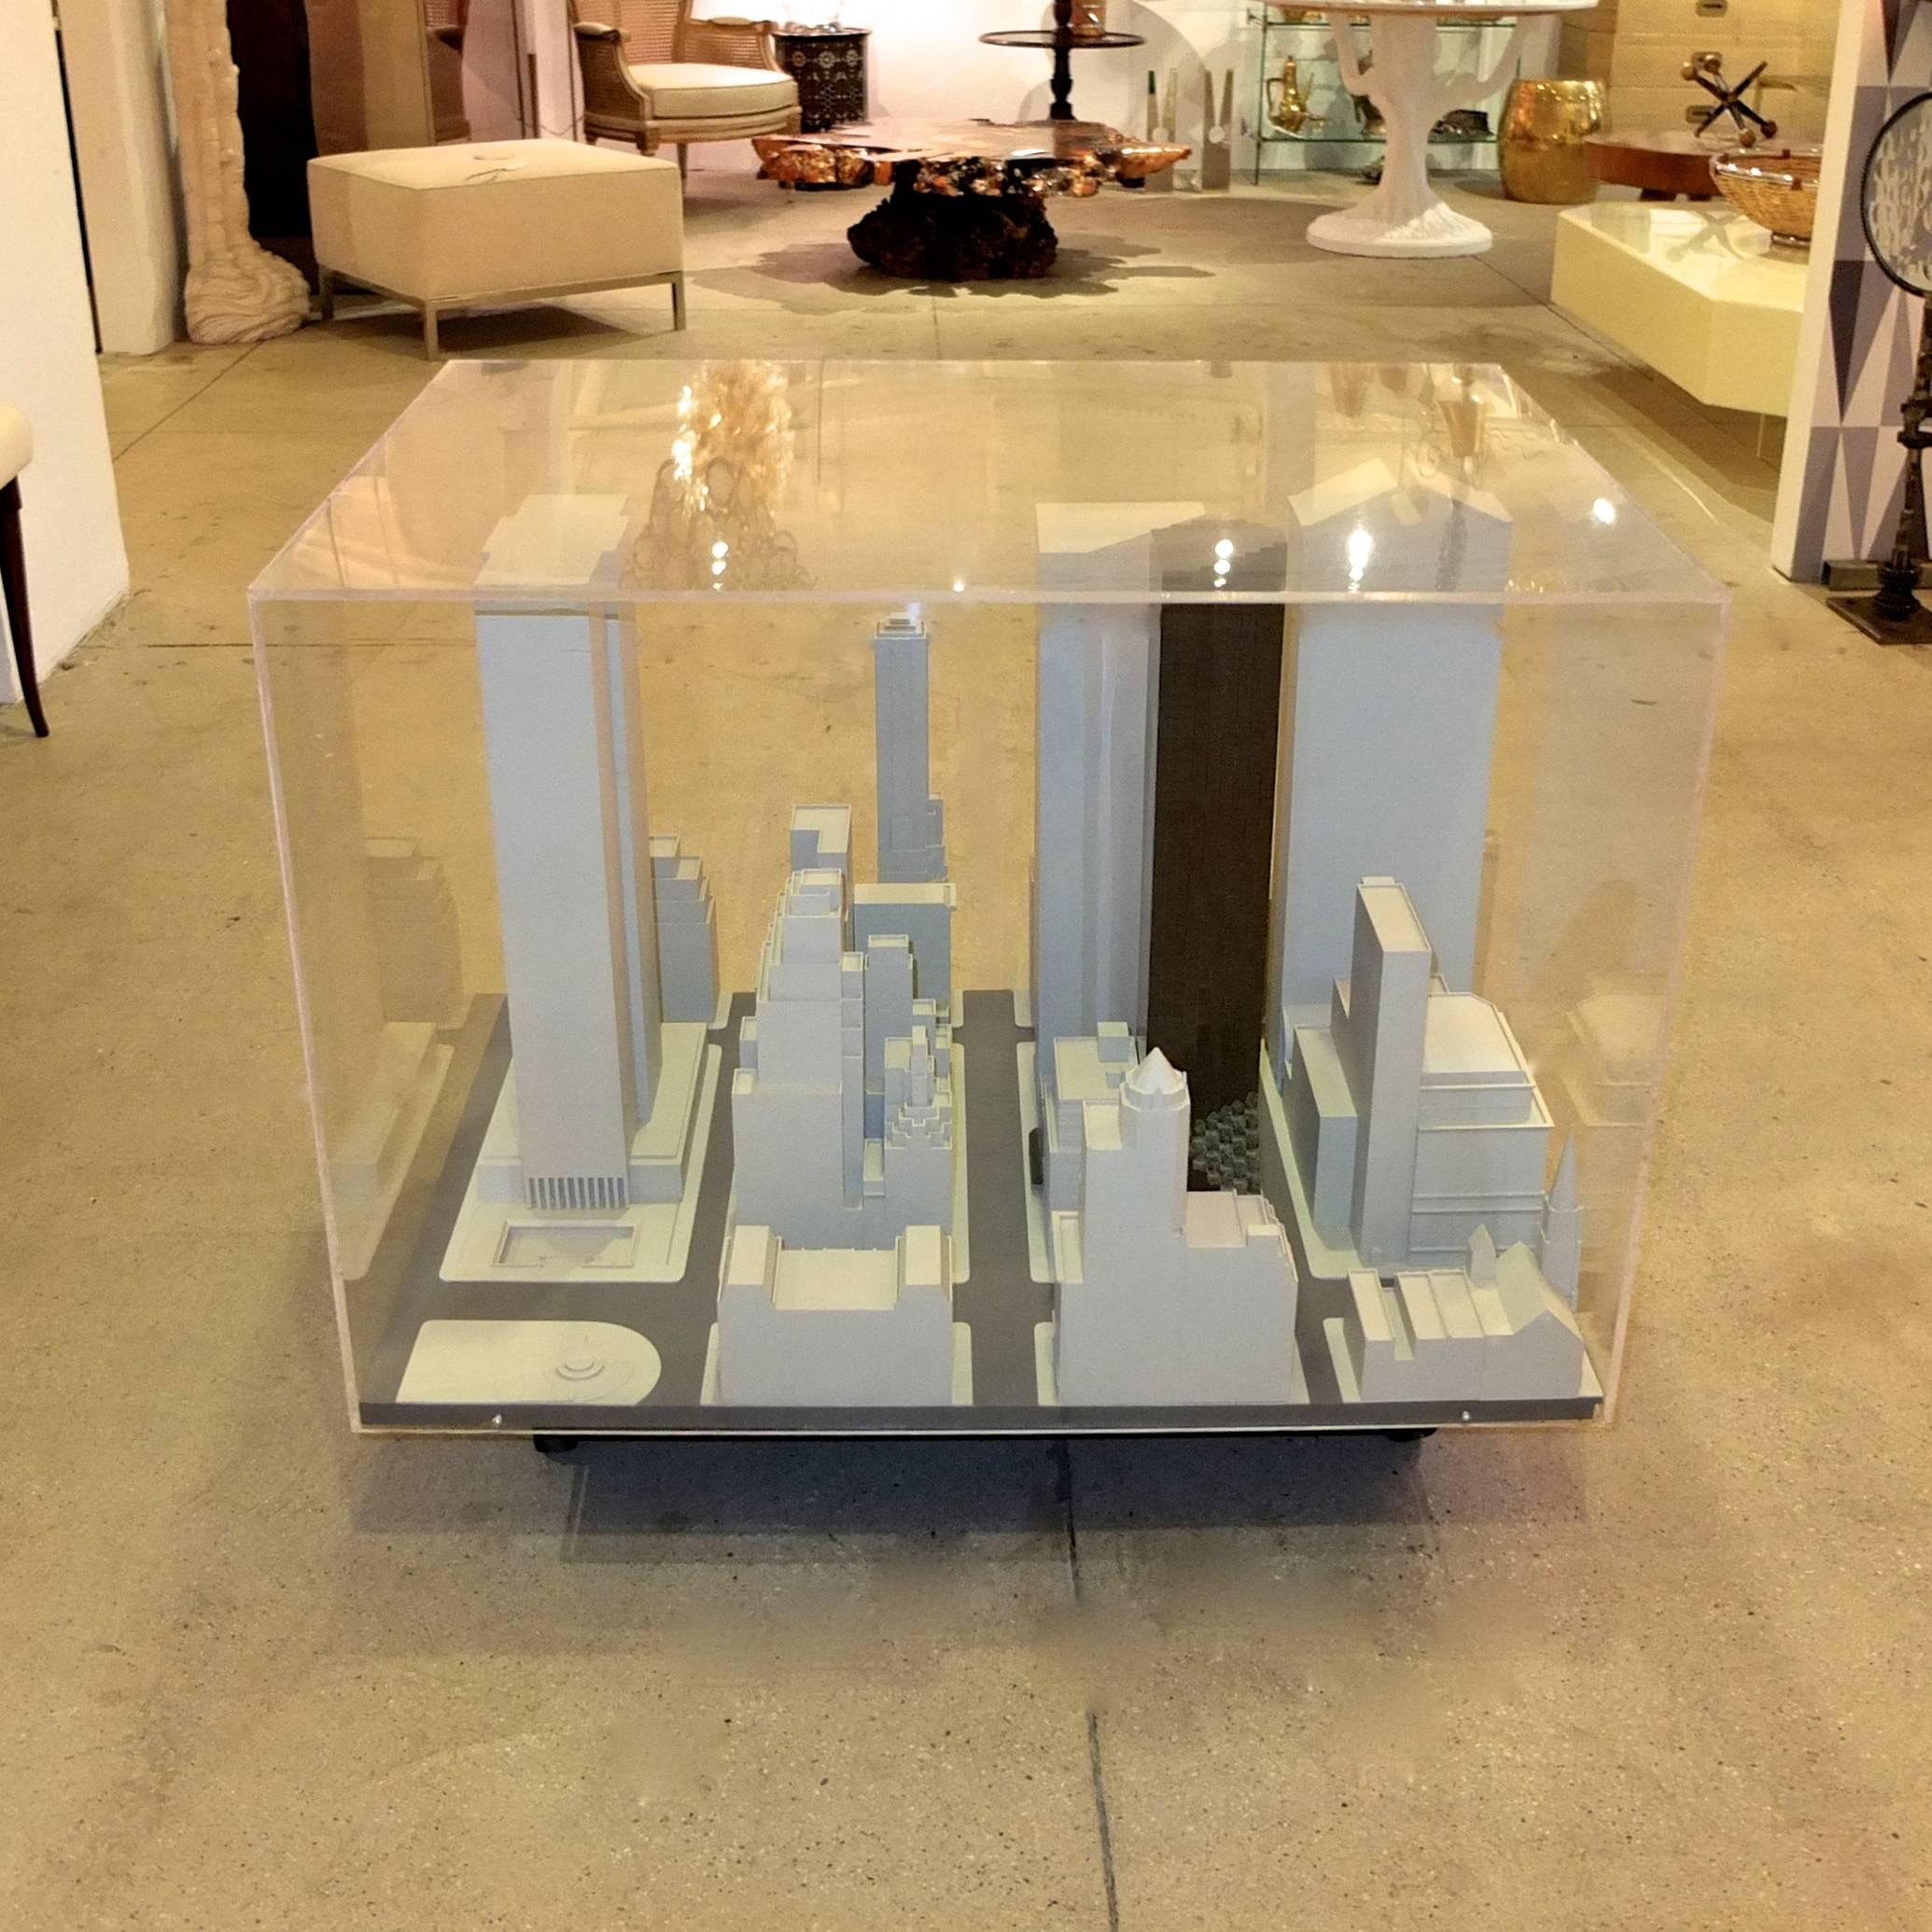 Original architect's model for trump tower, 725 5th Avenue, New York, from the estate of the architect, Der Scutt. Scutt was the principal architect while with the firm Swanke Hayden Connell. Der Scutt had previously transformed for Trump the old